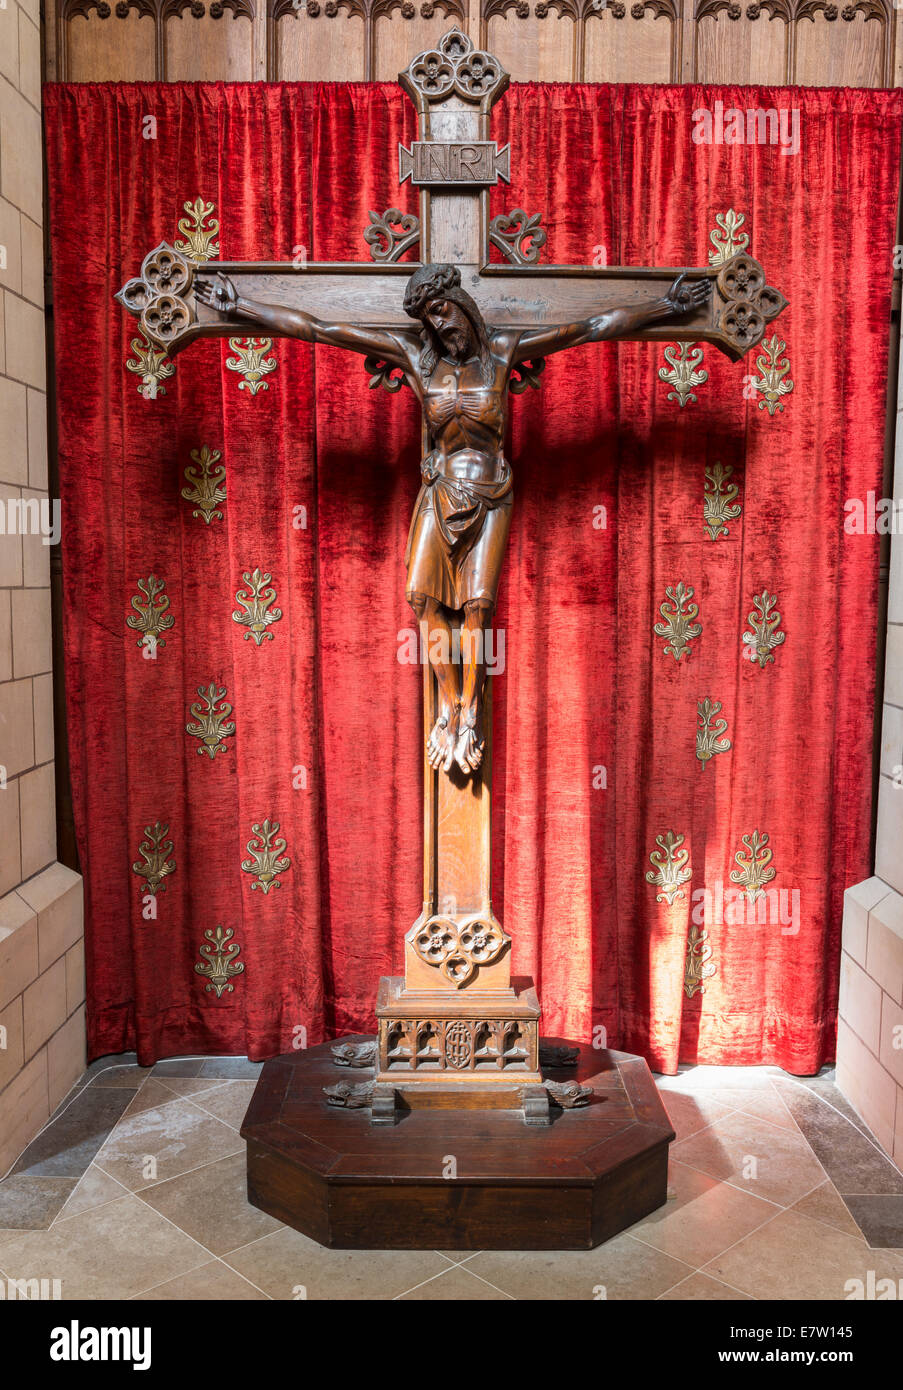 The interior of Buckfast Abbey showing a large cross of Jesus against a red velvet background. Stock Photo